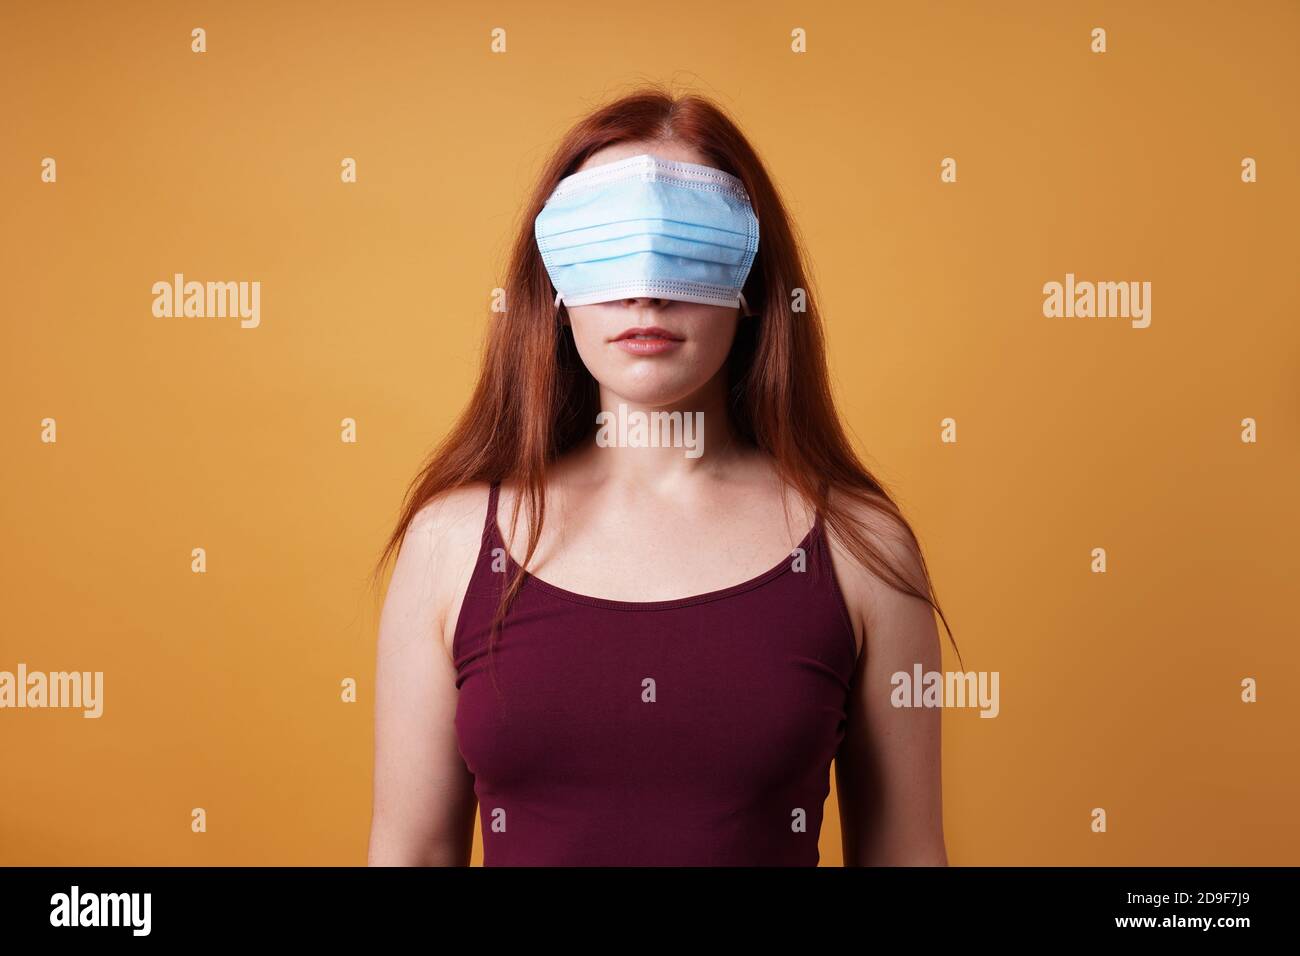 young woman wearing medical face mask over her eyes - funny corona denier concept Stock Photo